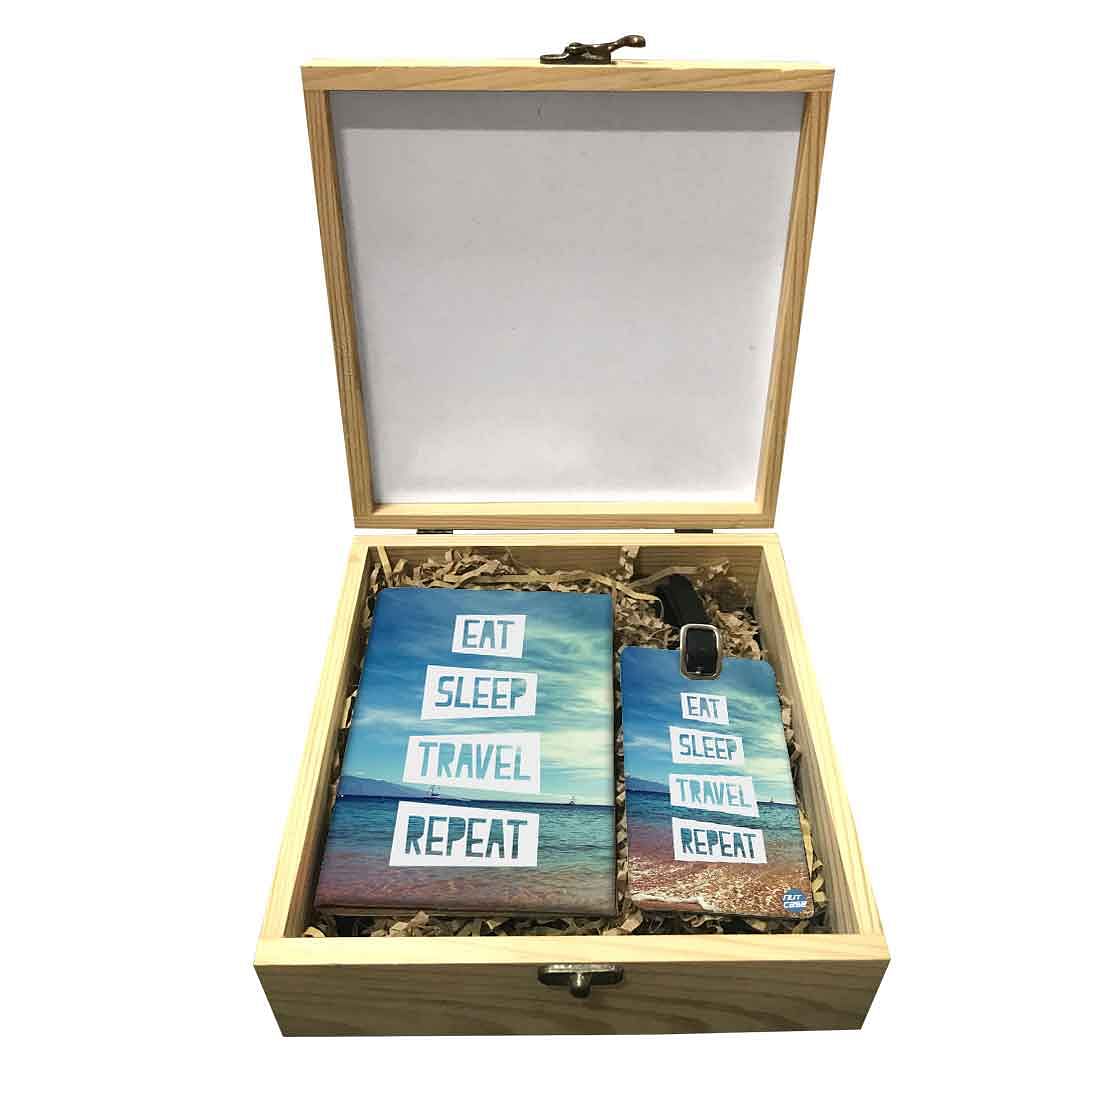 Passport Cover Luggage Tag Wooden Gift Box Set - Eat Sleep Travel Repeat Nutcase